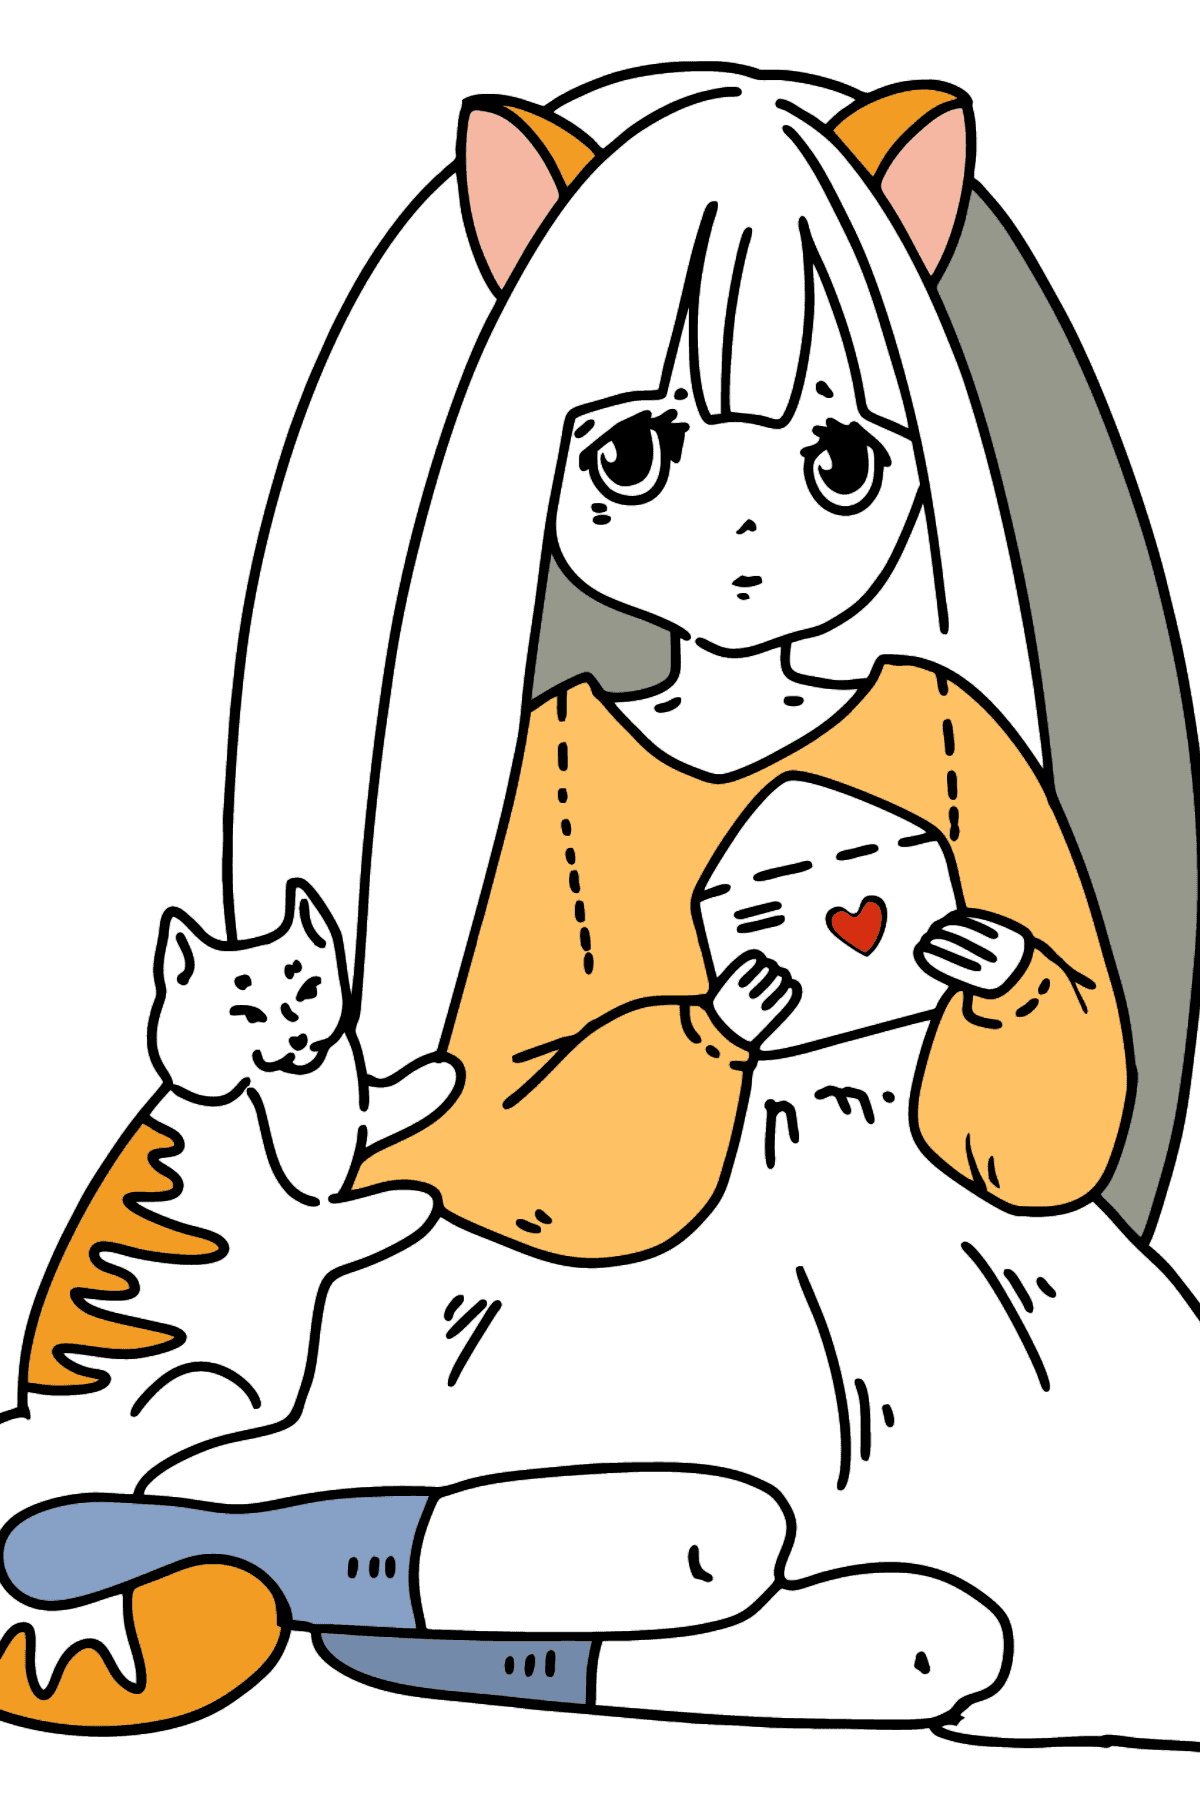 Anime Cute Girl Coloring Pages - Coloring Pages for Kids